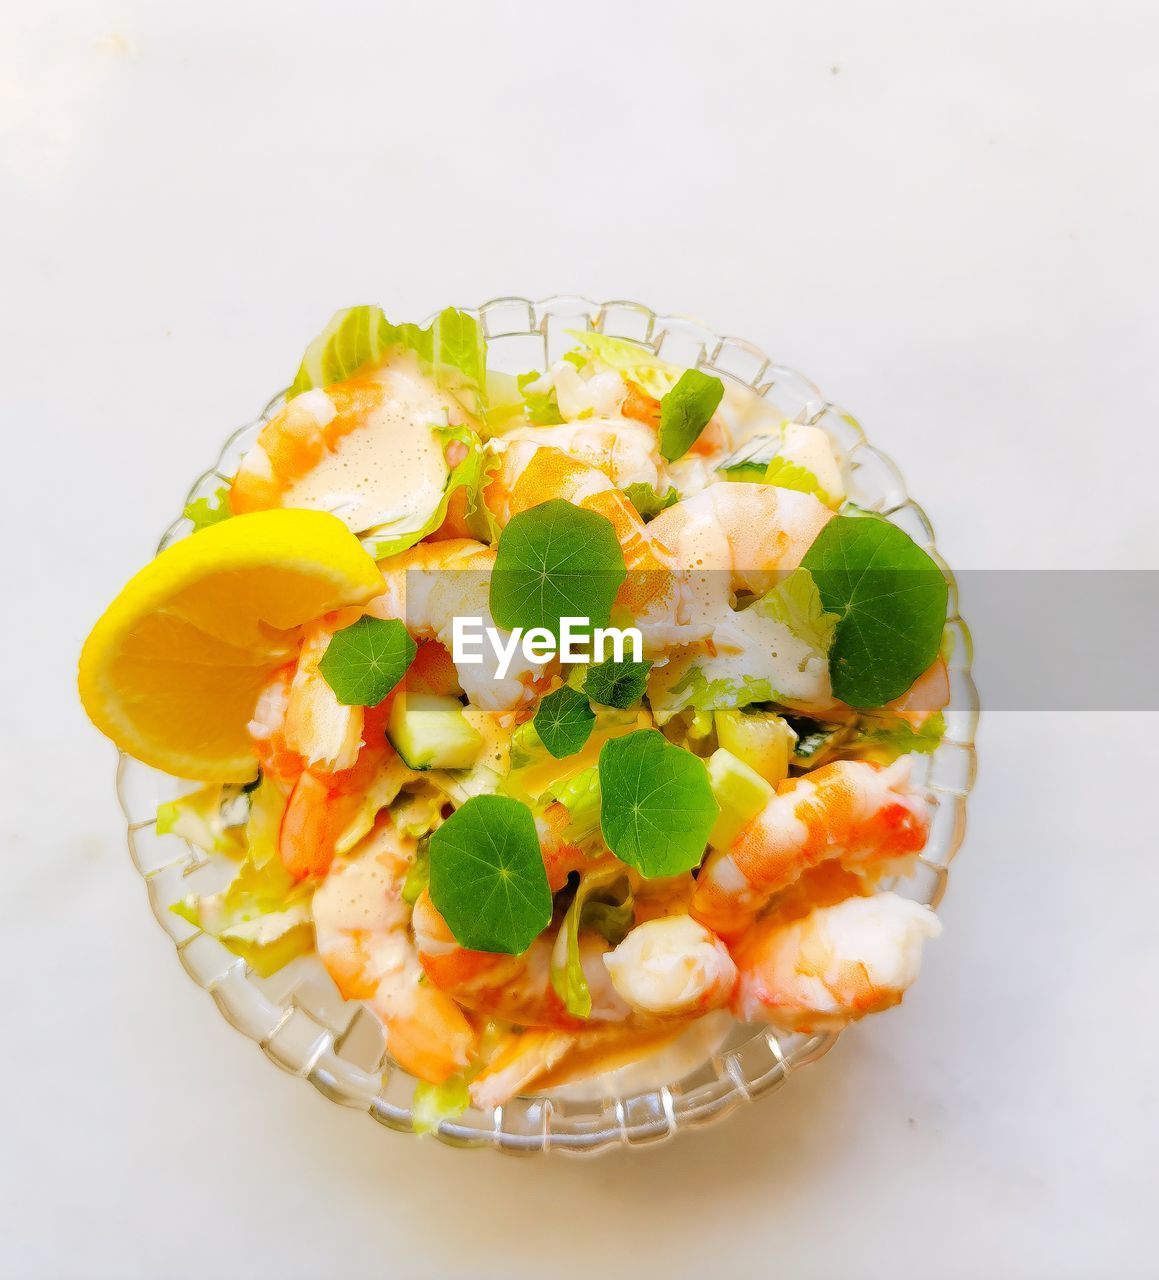 food and drink, food, healthy eating, dish, vegetable, wellbeing, salad, fruit, freshness, cuisine, herb, produce, studio shot, no people, seafood, indoors, meal, high angle view, bowl, vegetarian food, sweet food, appetizer